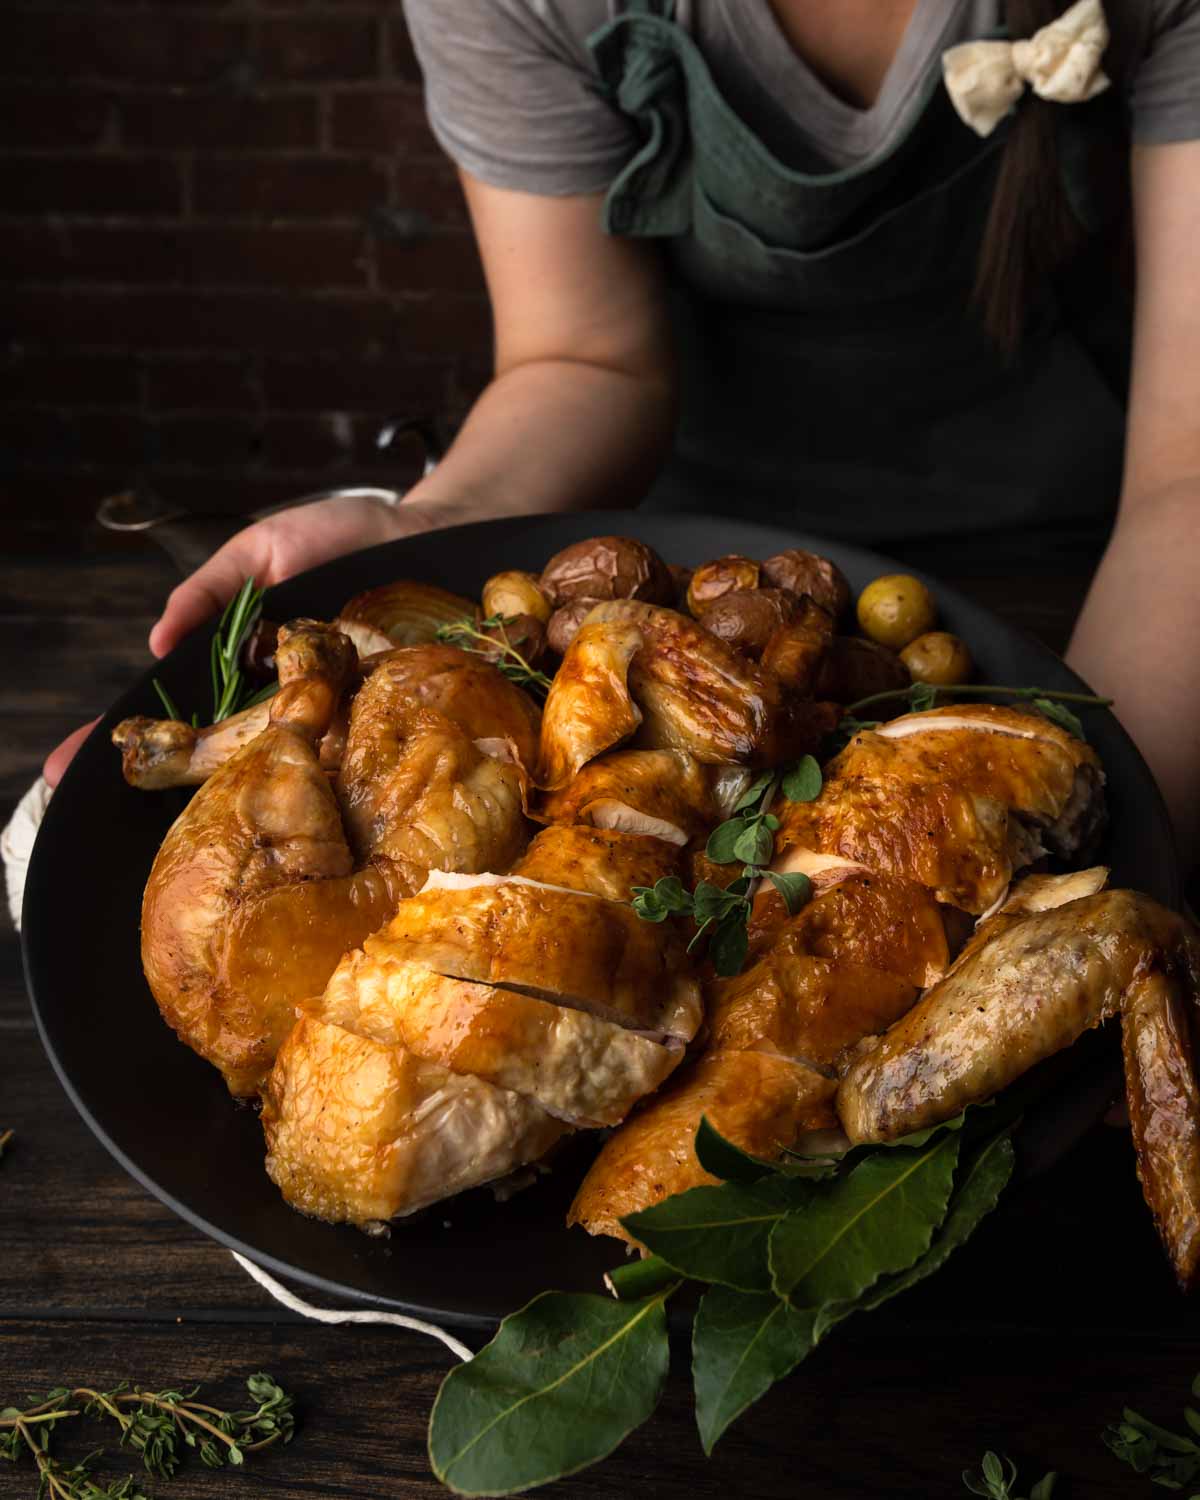 A woman holding a platter of carved roast chicken and baby potatoes.